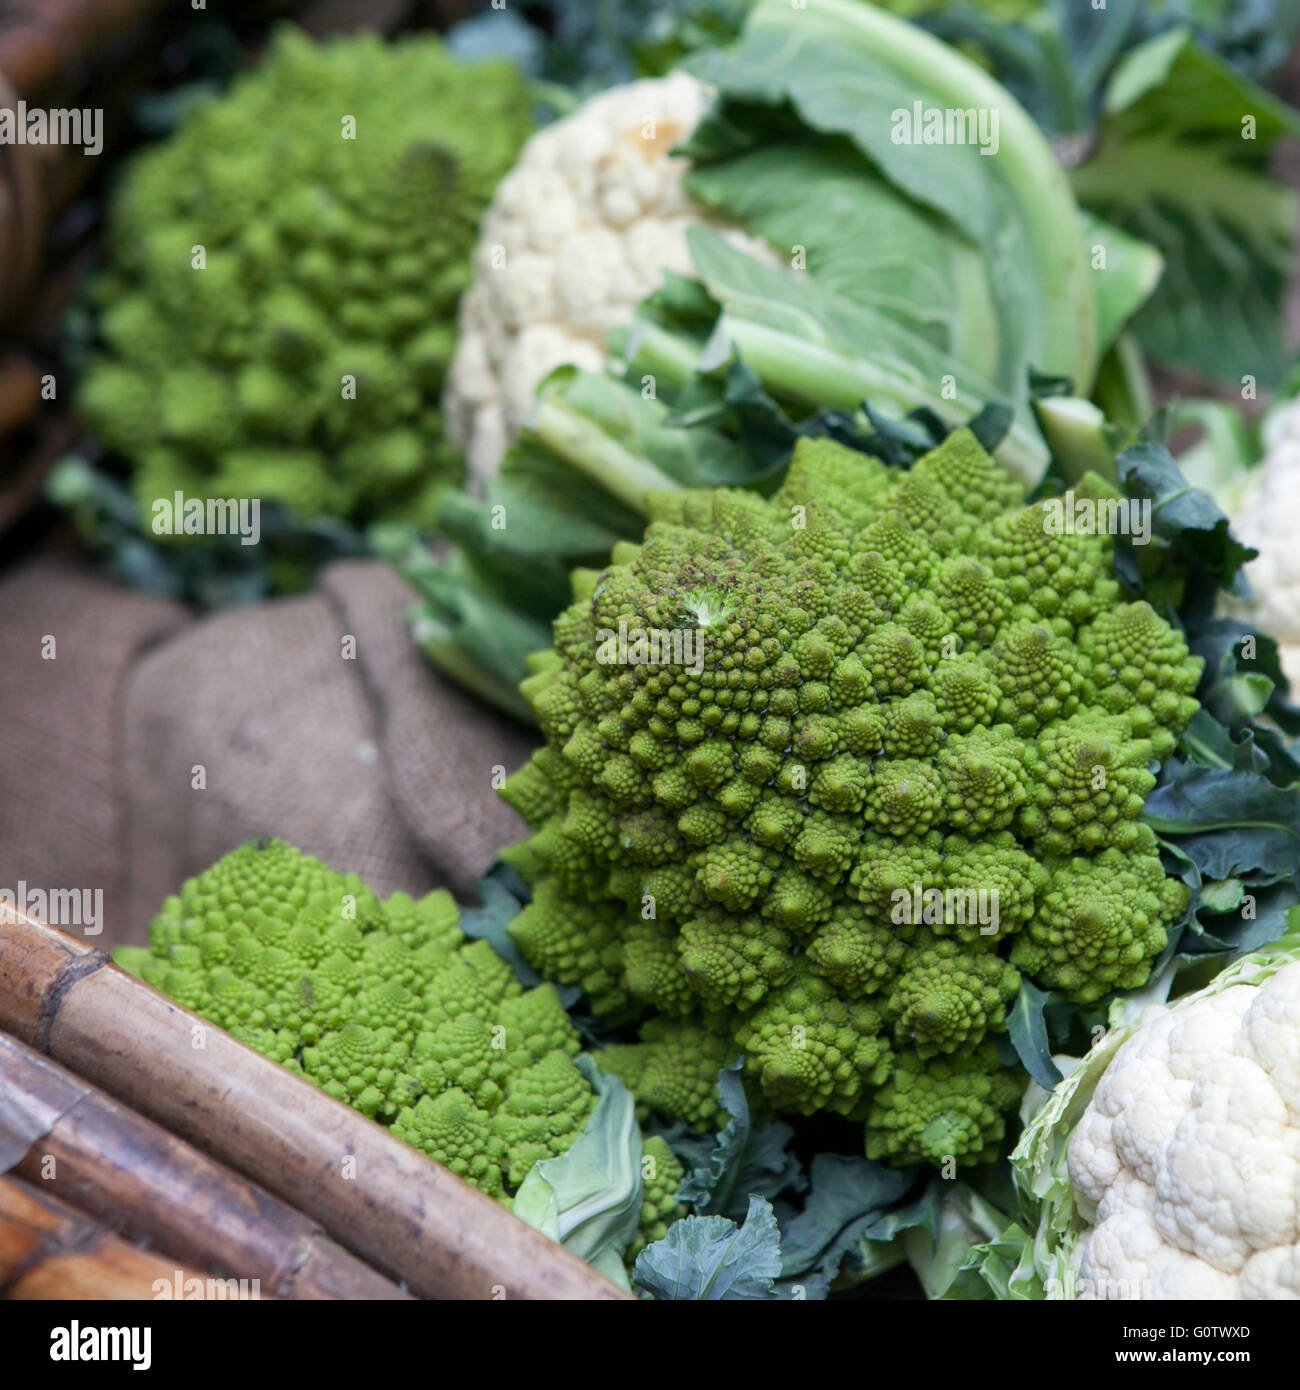 Romanesco cauliflower with its fractal shapes and Fibonacci sequences in focus,  and cabbage leaves in the background. Stock Photo